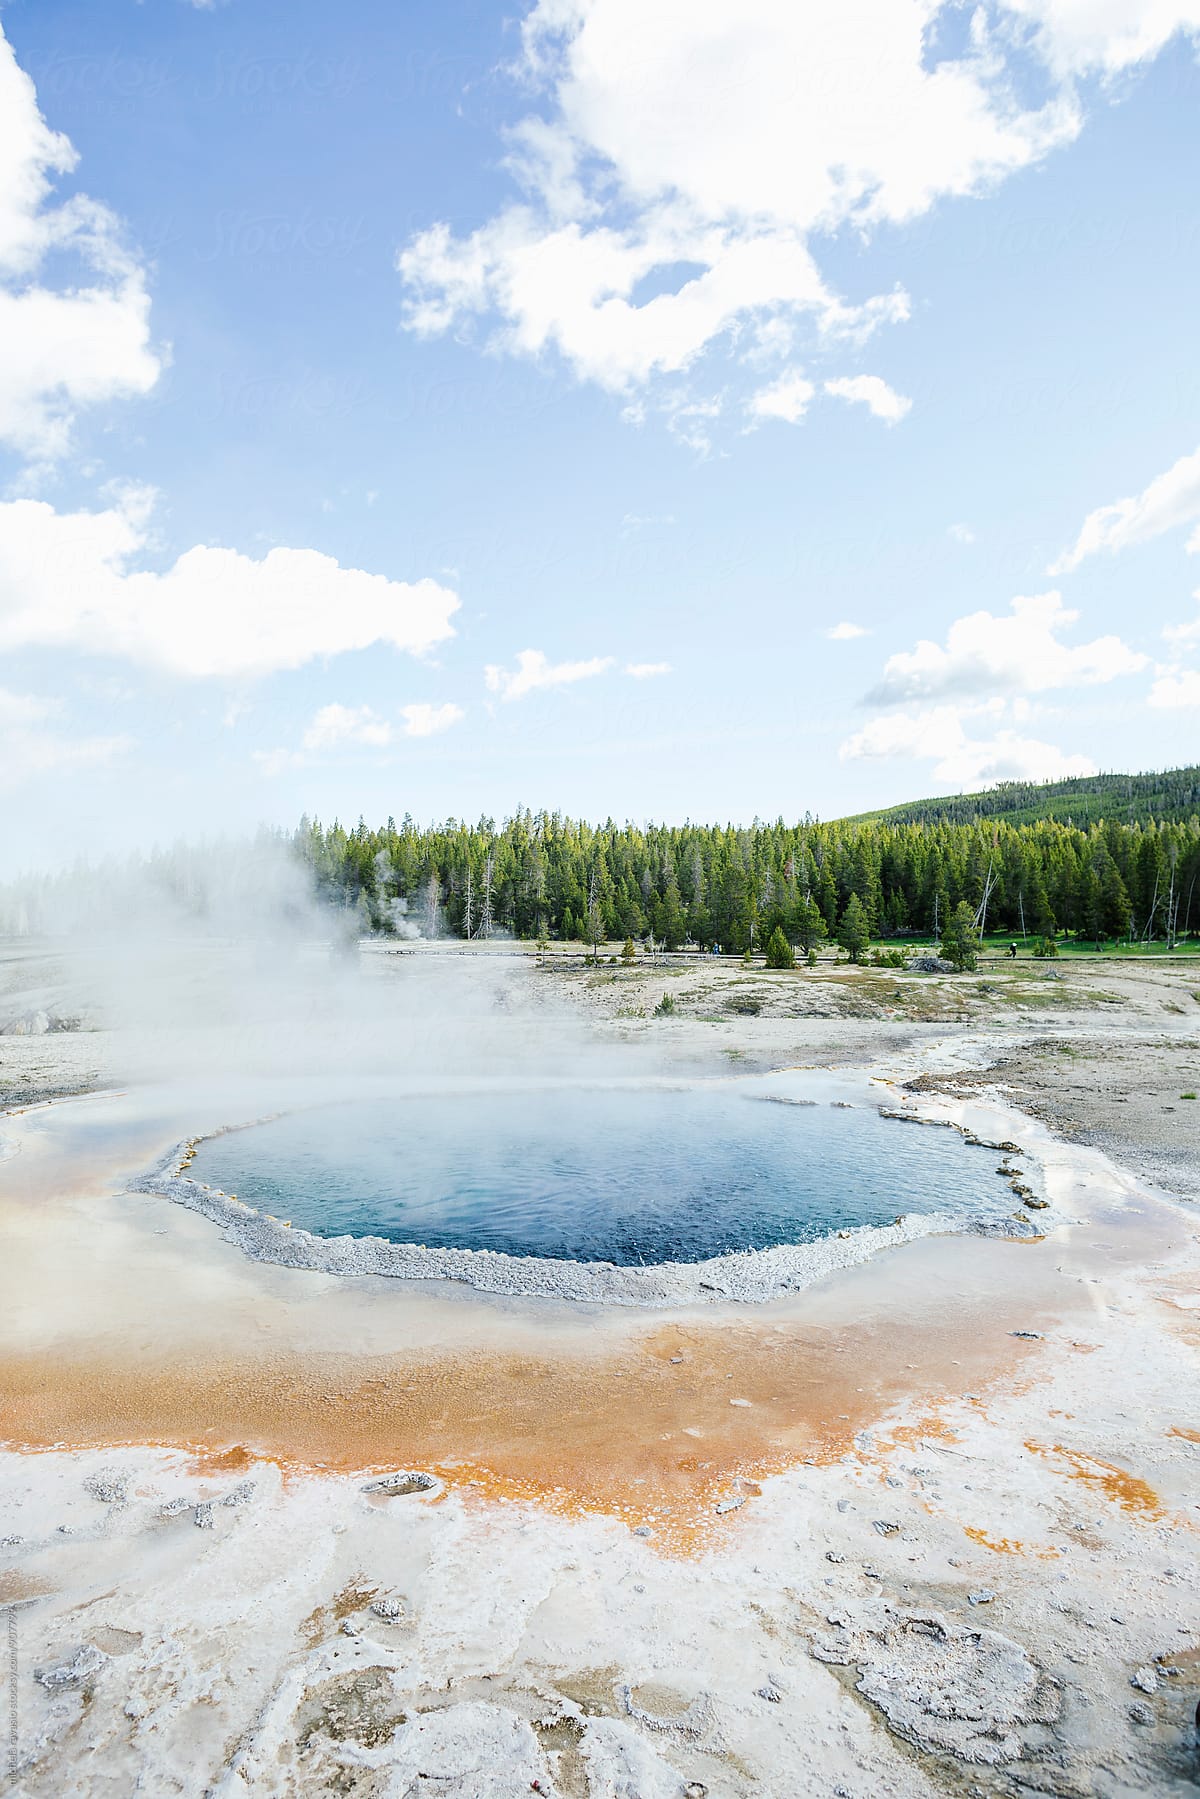 View of hot spring water in Yellowstone National Park